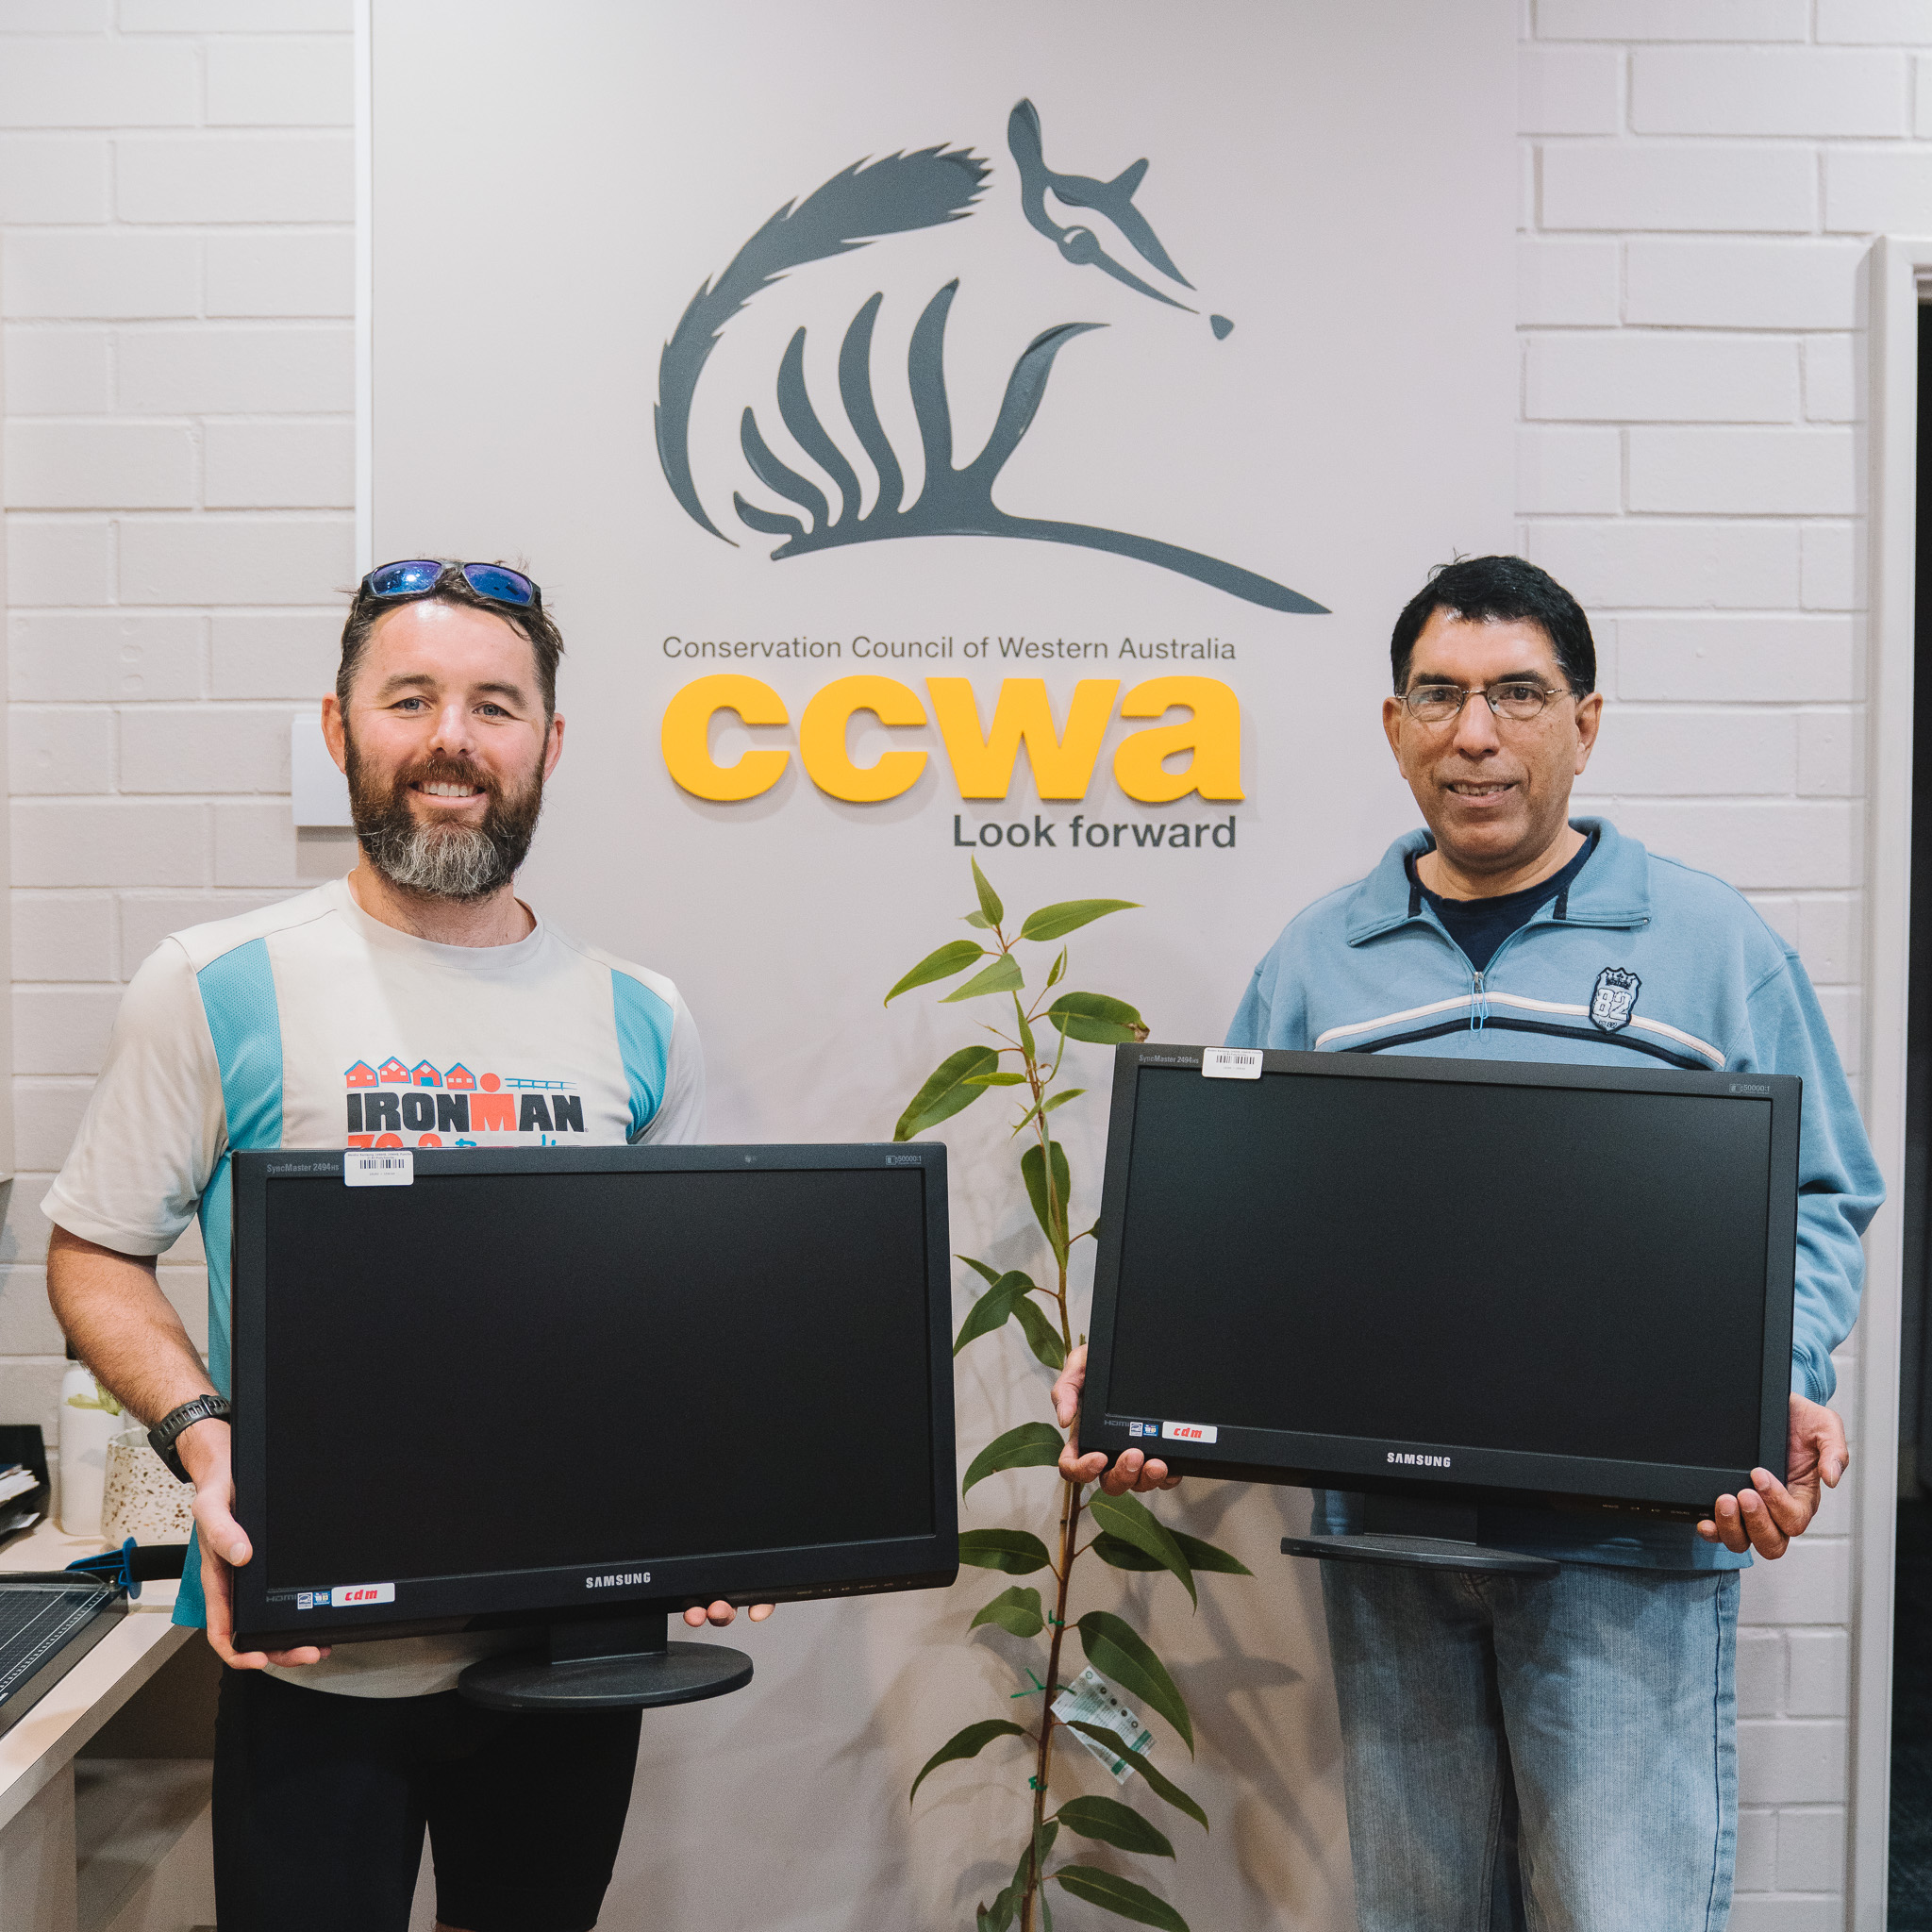 Total Green donates computers to Conservation Council